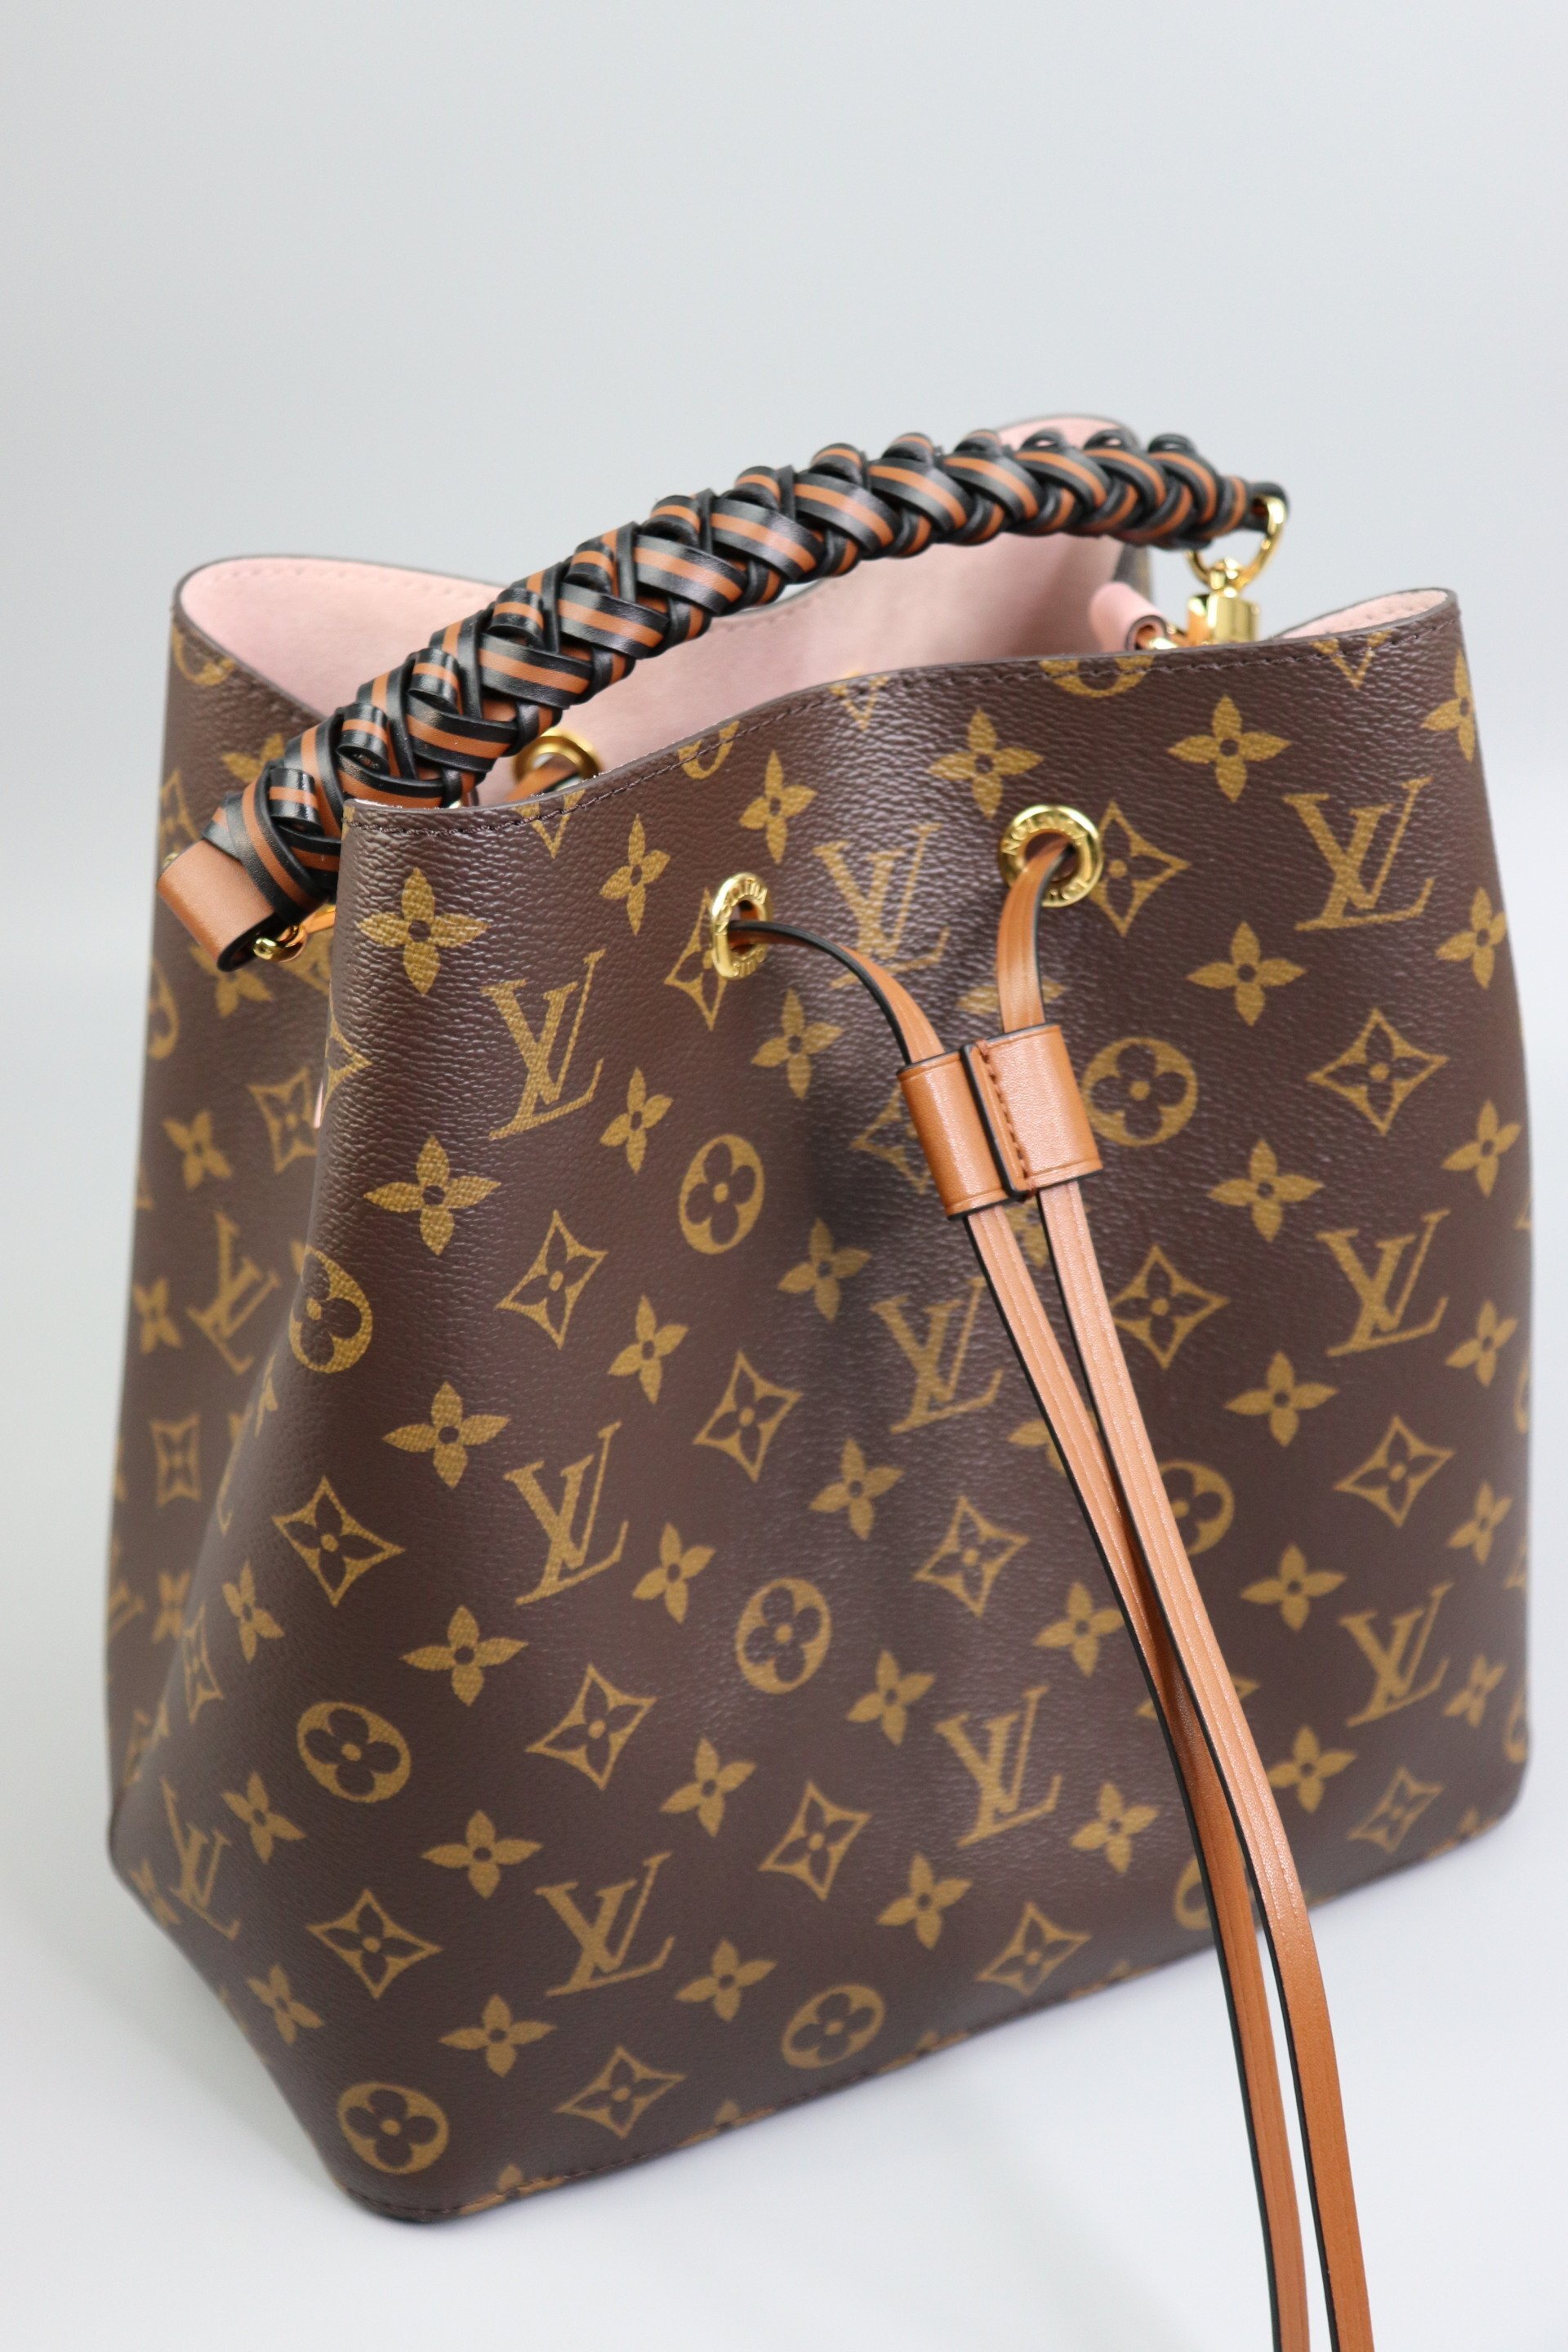 Leather Drawstring & Cinch Cord Replacement for Louis Vuitton (LV) Noe  Bucket Bags or Similar Style